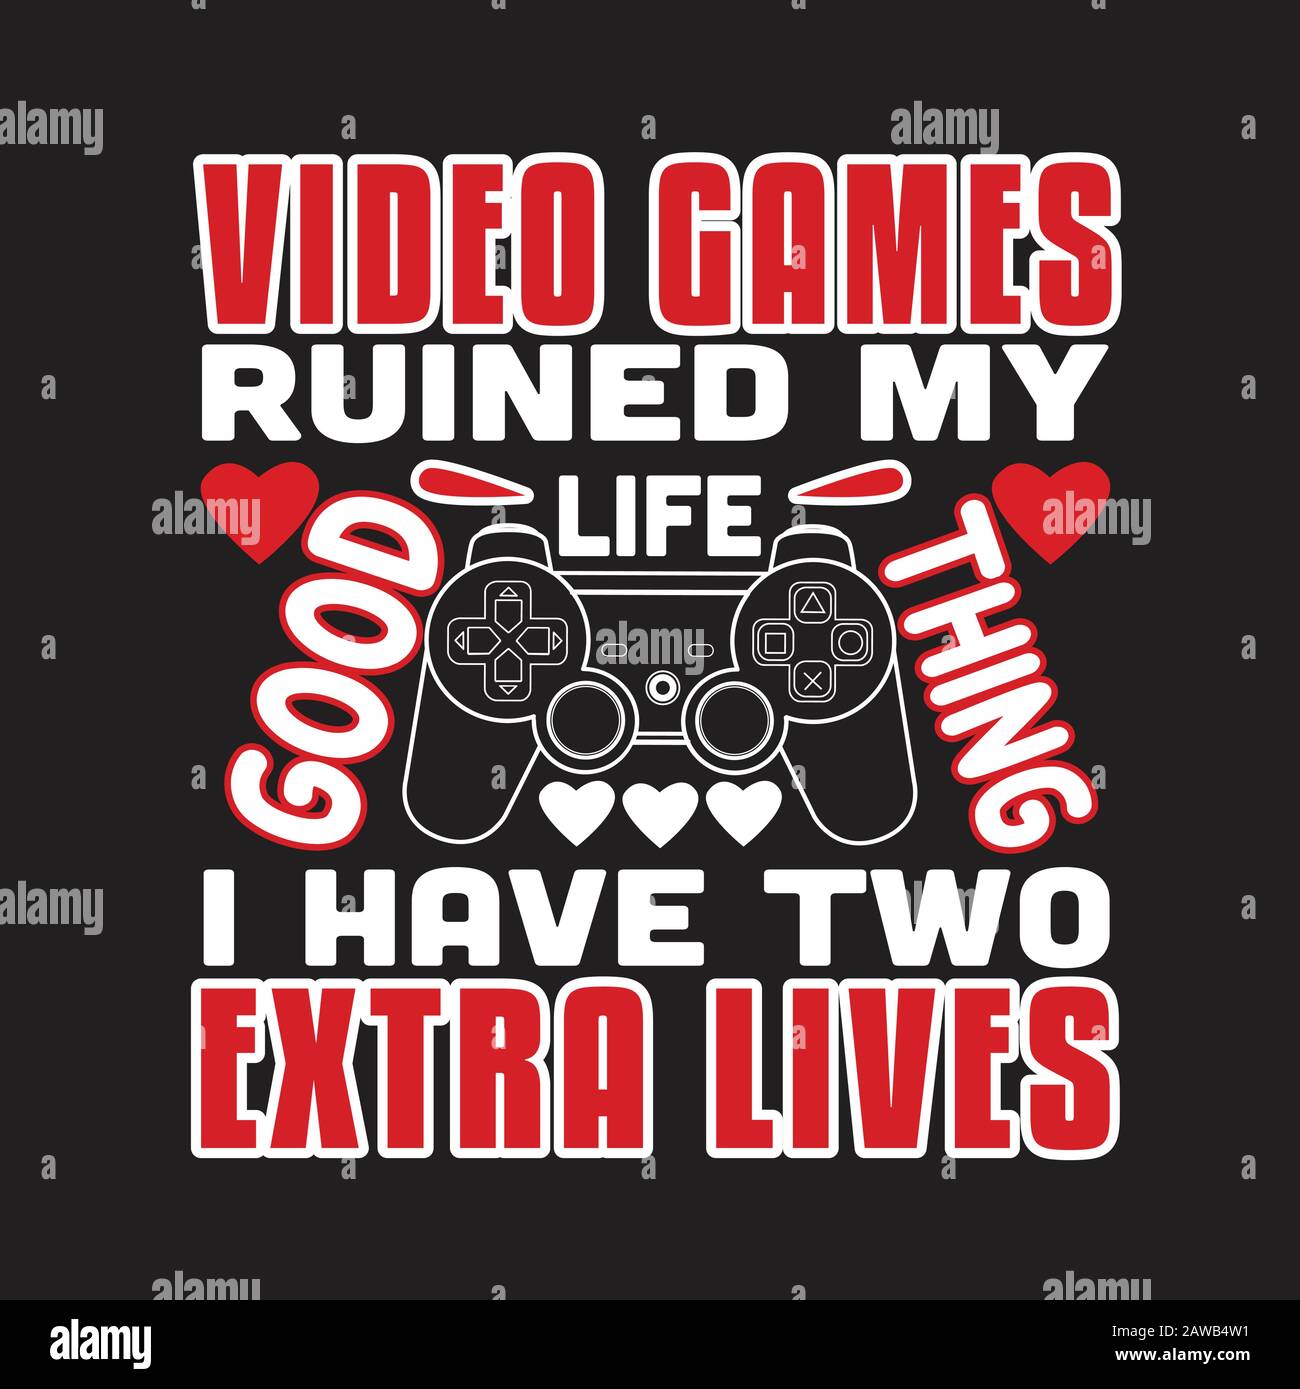 Gamer Quotes And Slogan Good For Print Video Games Ruined My Life Good Thing I Have Two Extra Lives Stock Vector Image Art Alamy